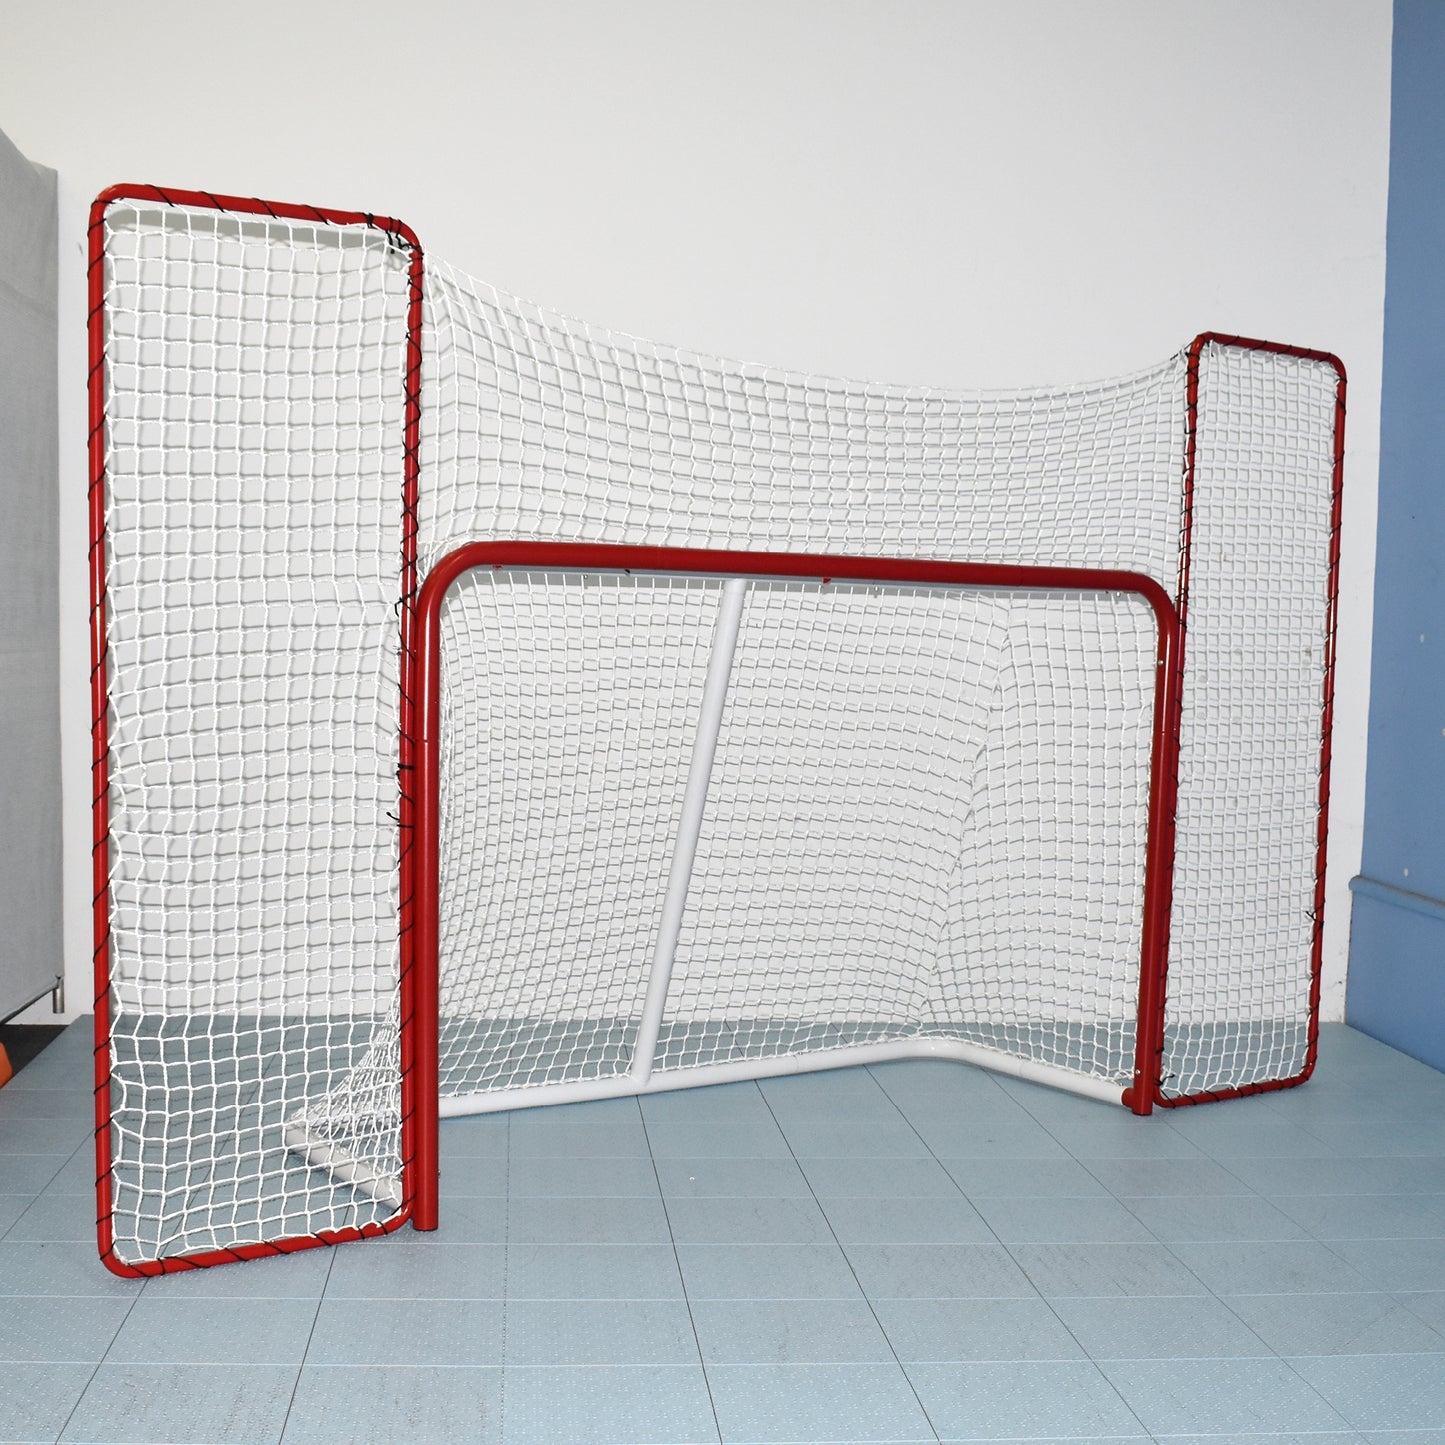 Hockey Goal with Backstop